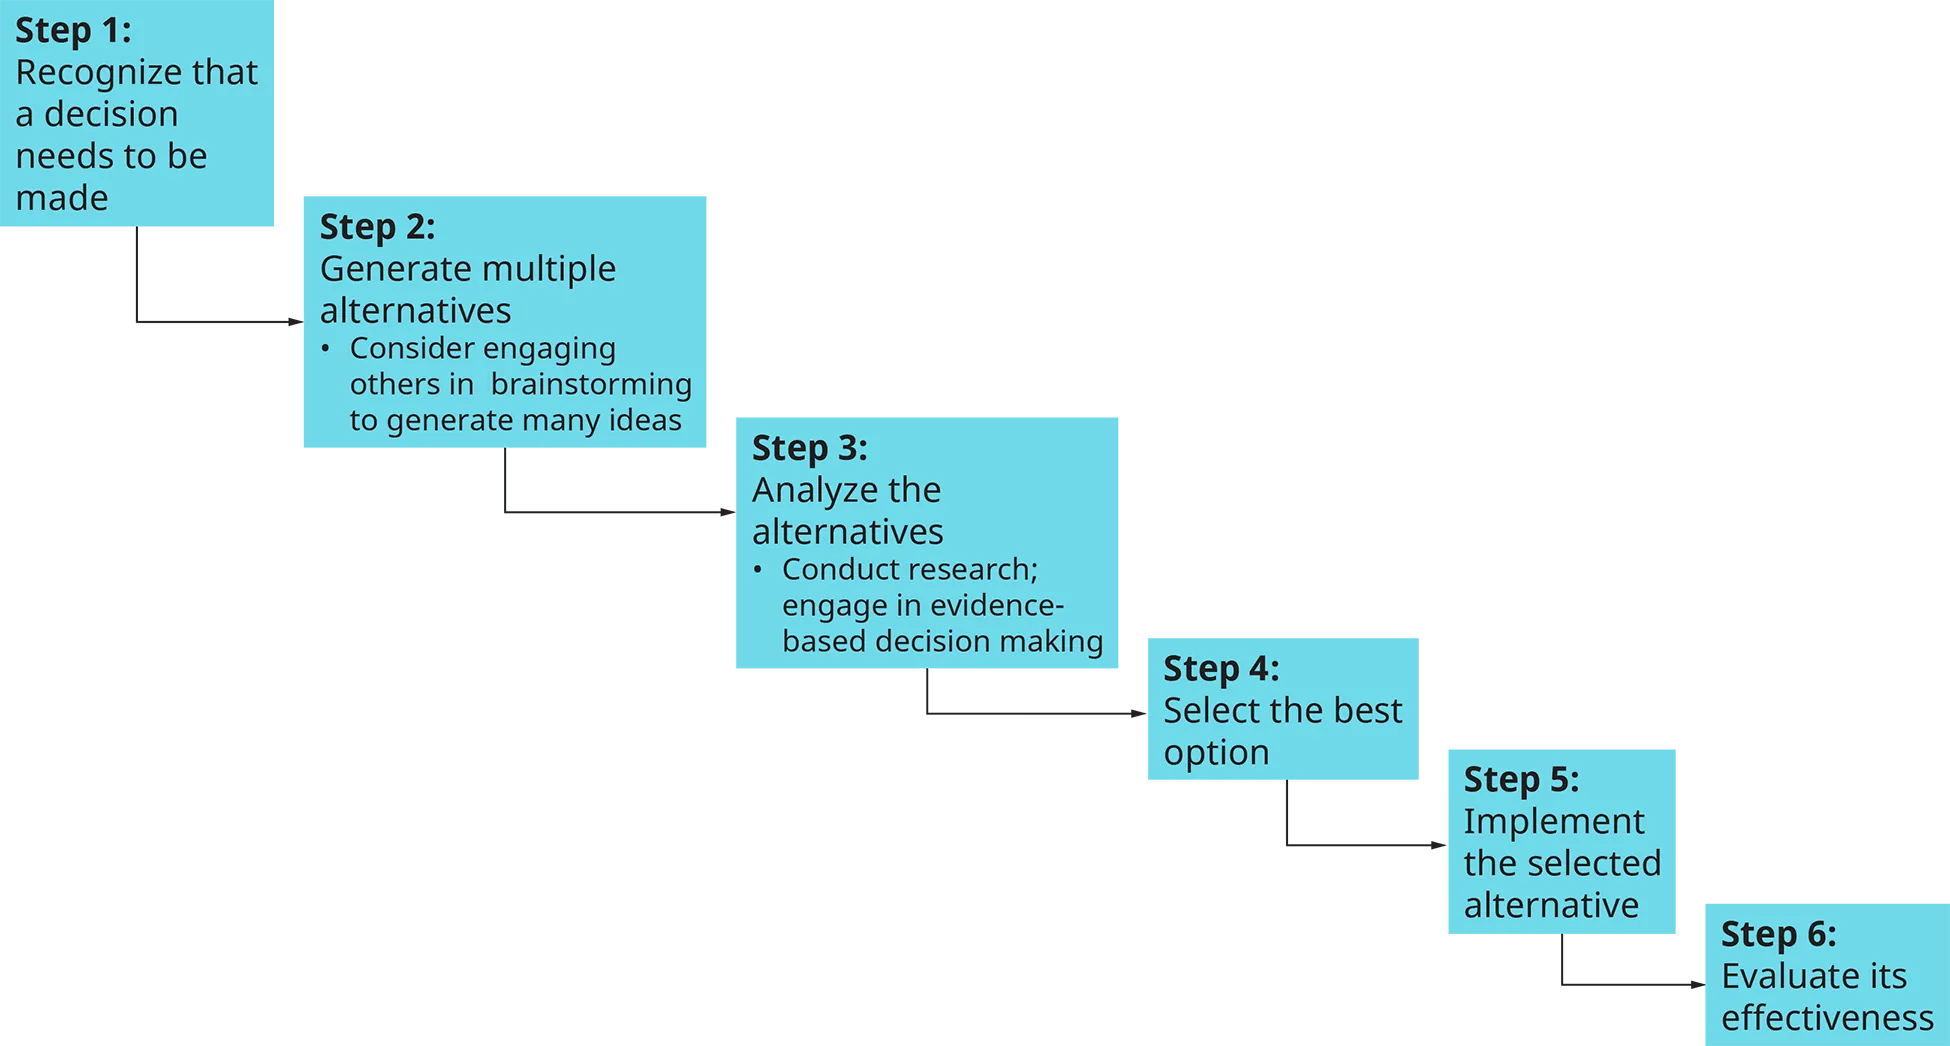 A flowchart shows the six steps in the decision-making process.